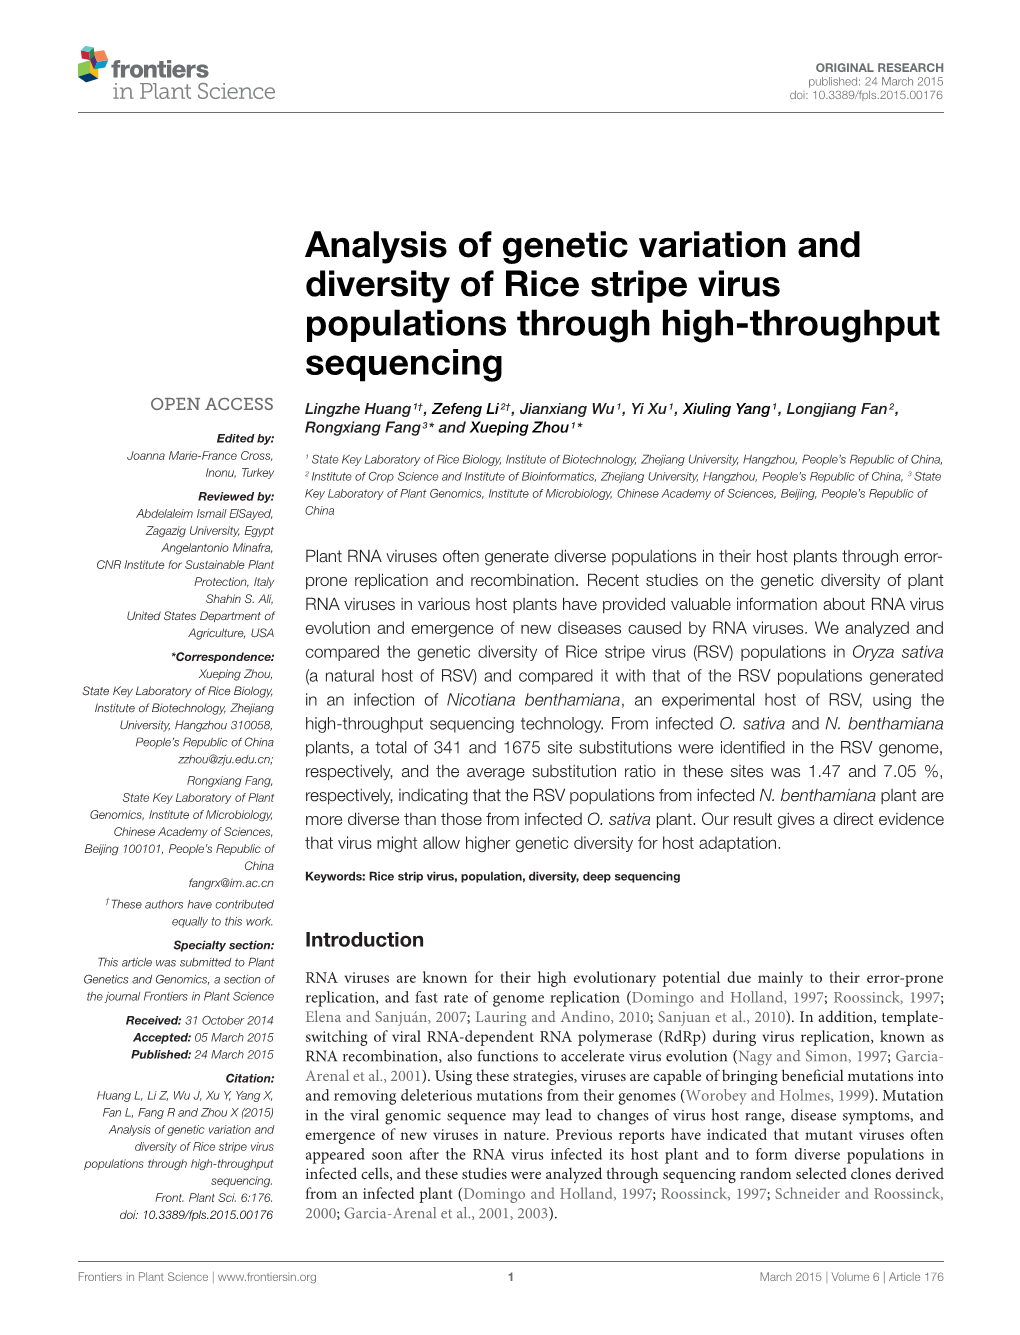 Analysis of Genetic Variation and Diversity of Rice Stripe Virus Populations Through High-Throughput Sequencing